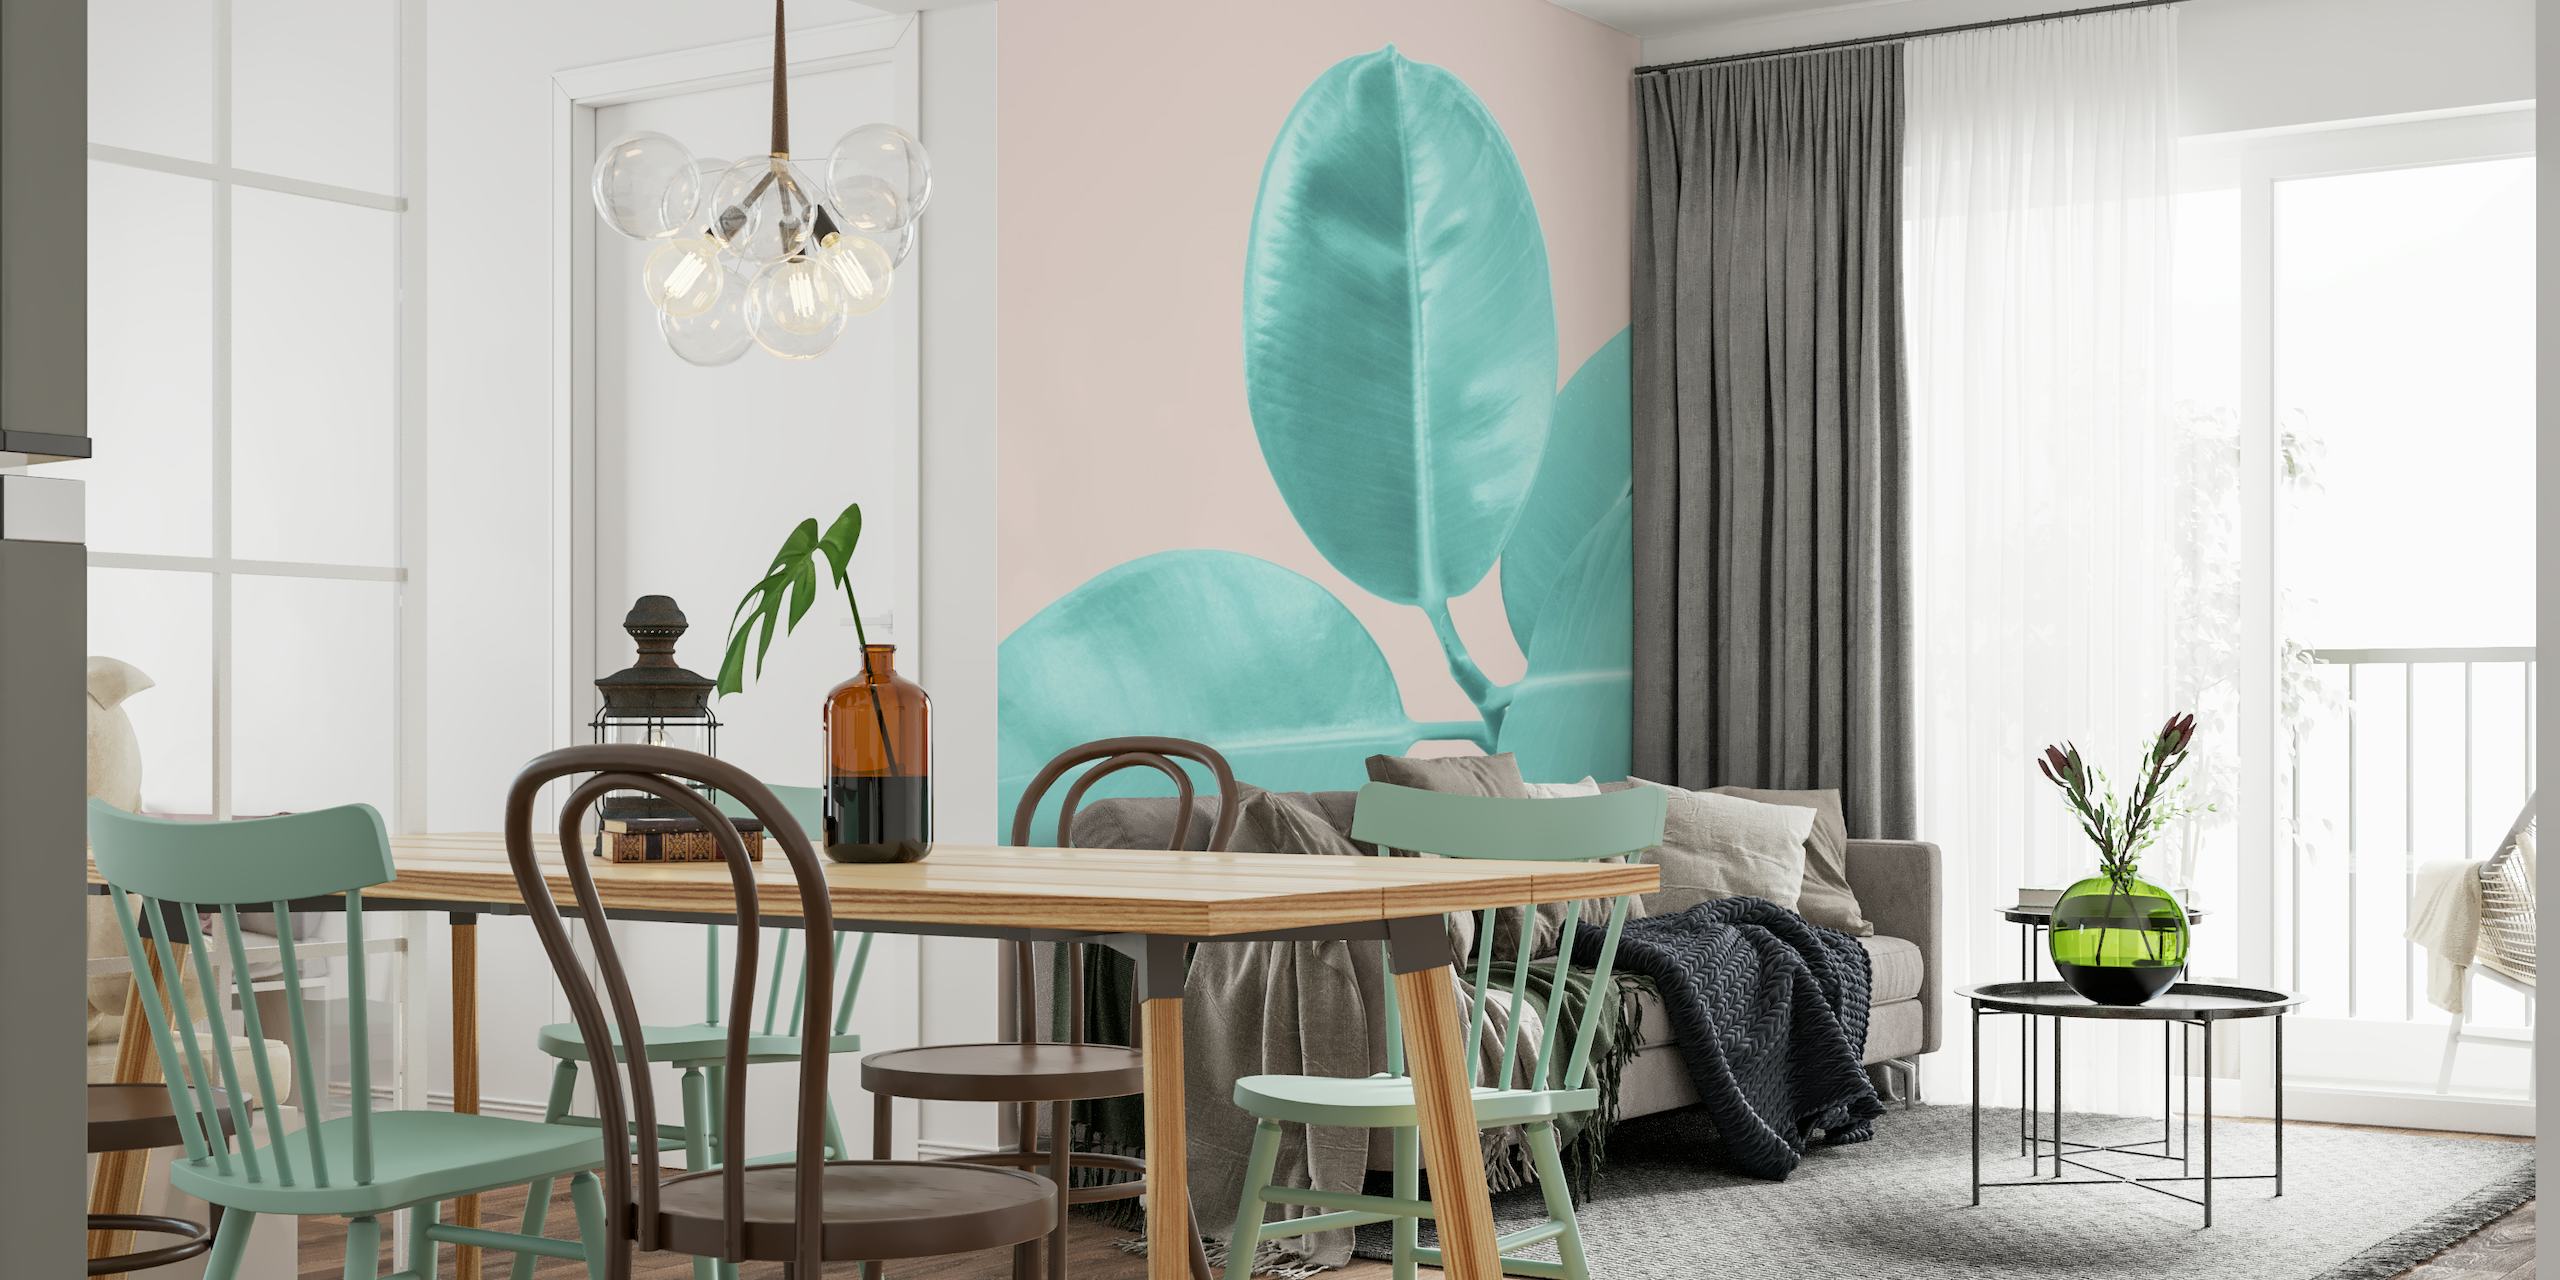 Pastel teal rubber plant leaves against a blush pink background wall mural